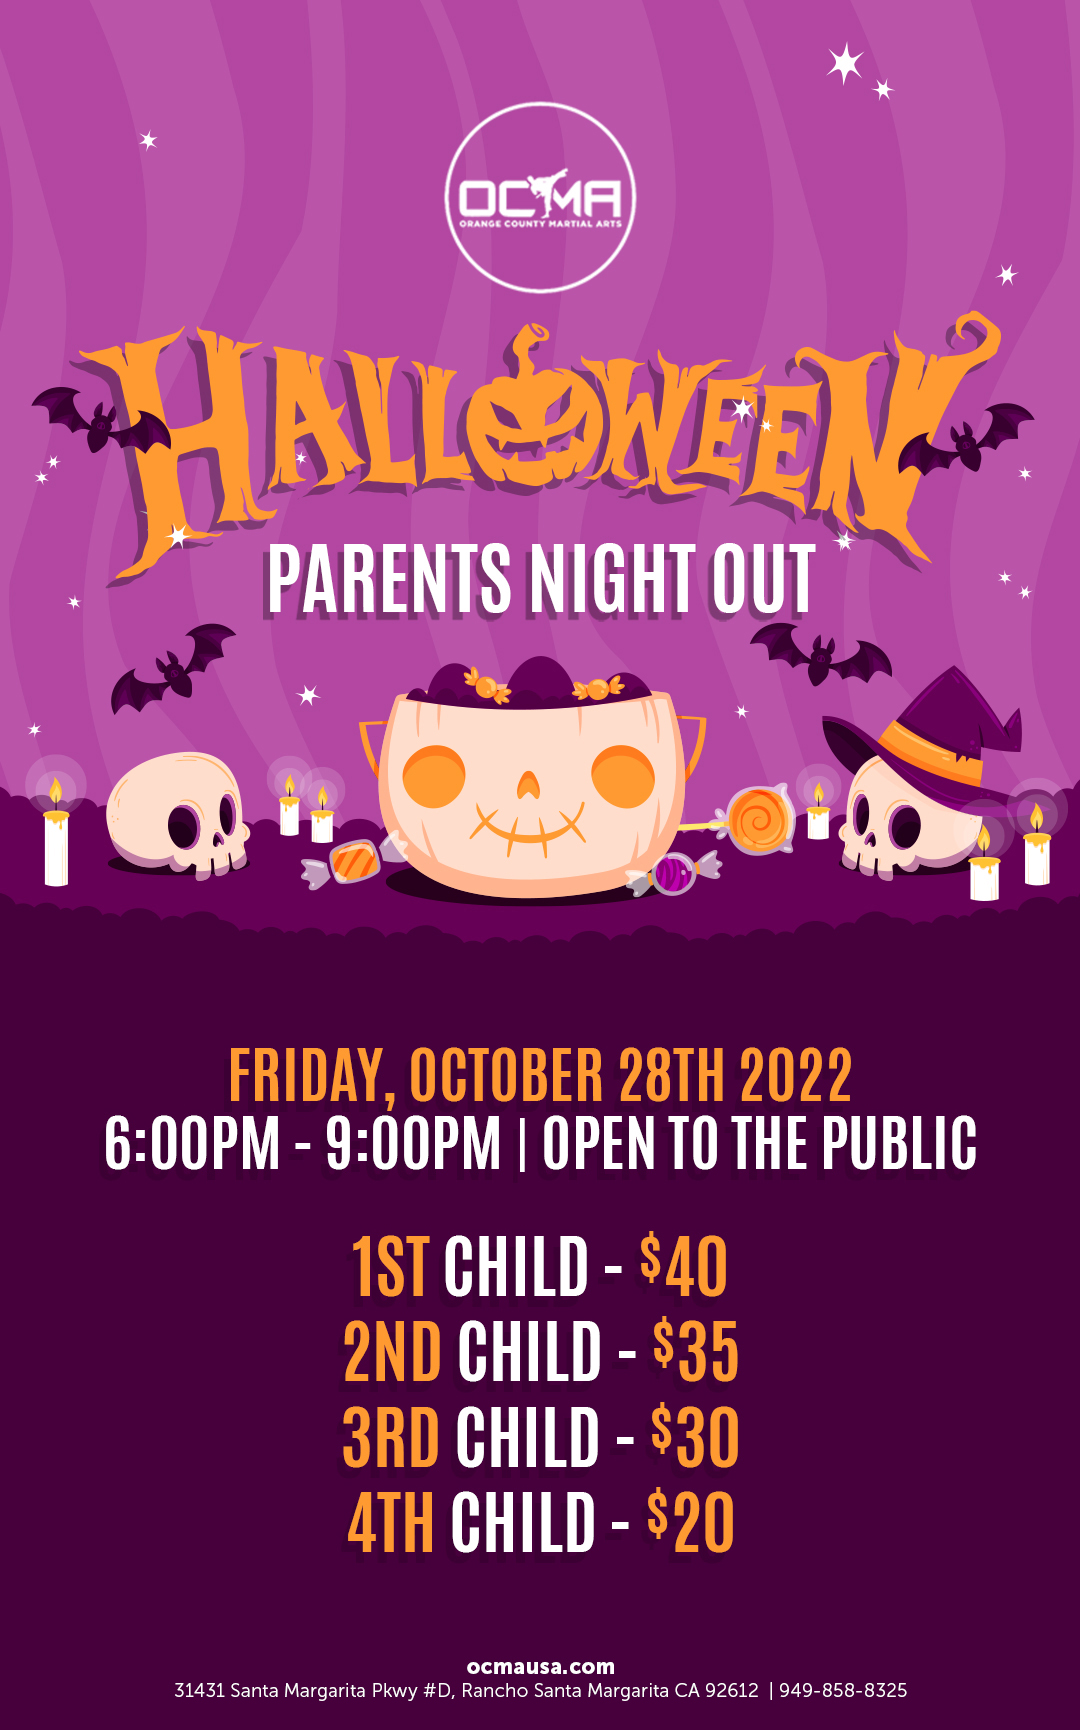 Halloween parents night out